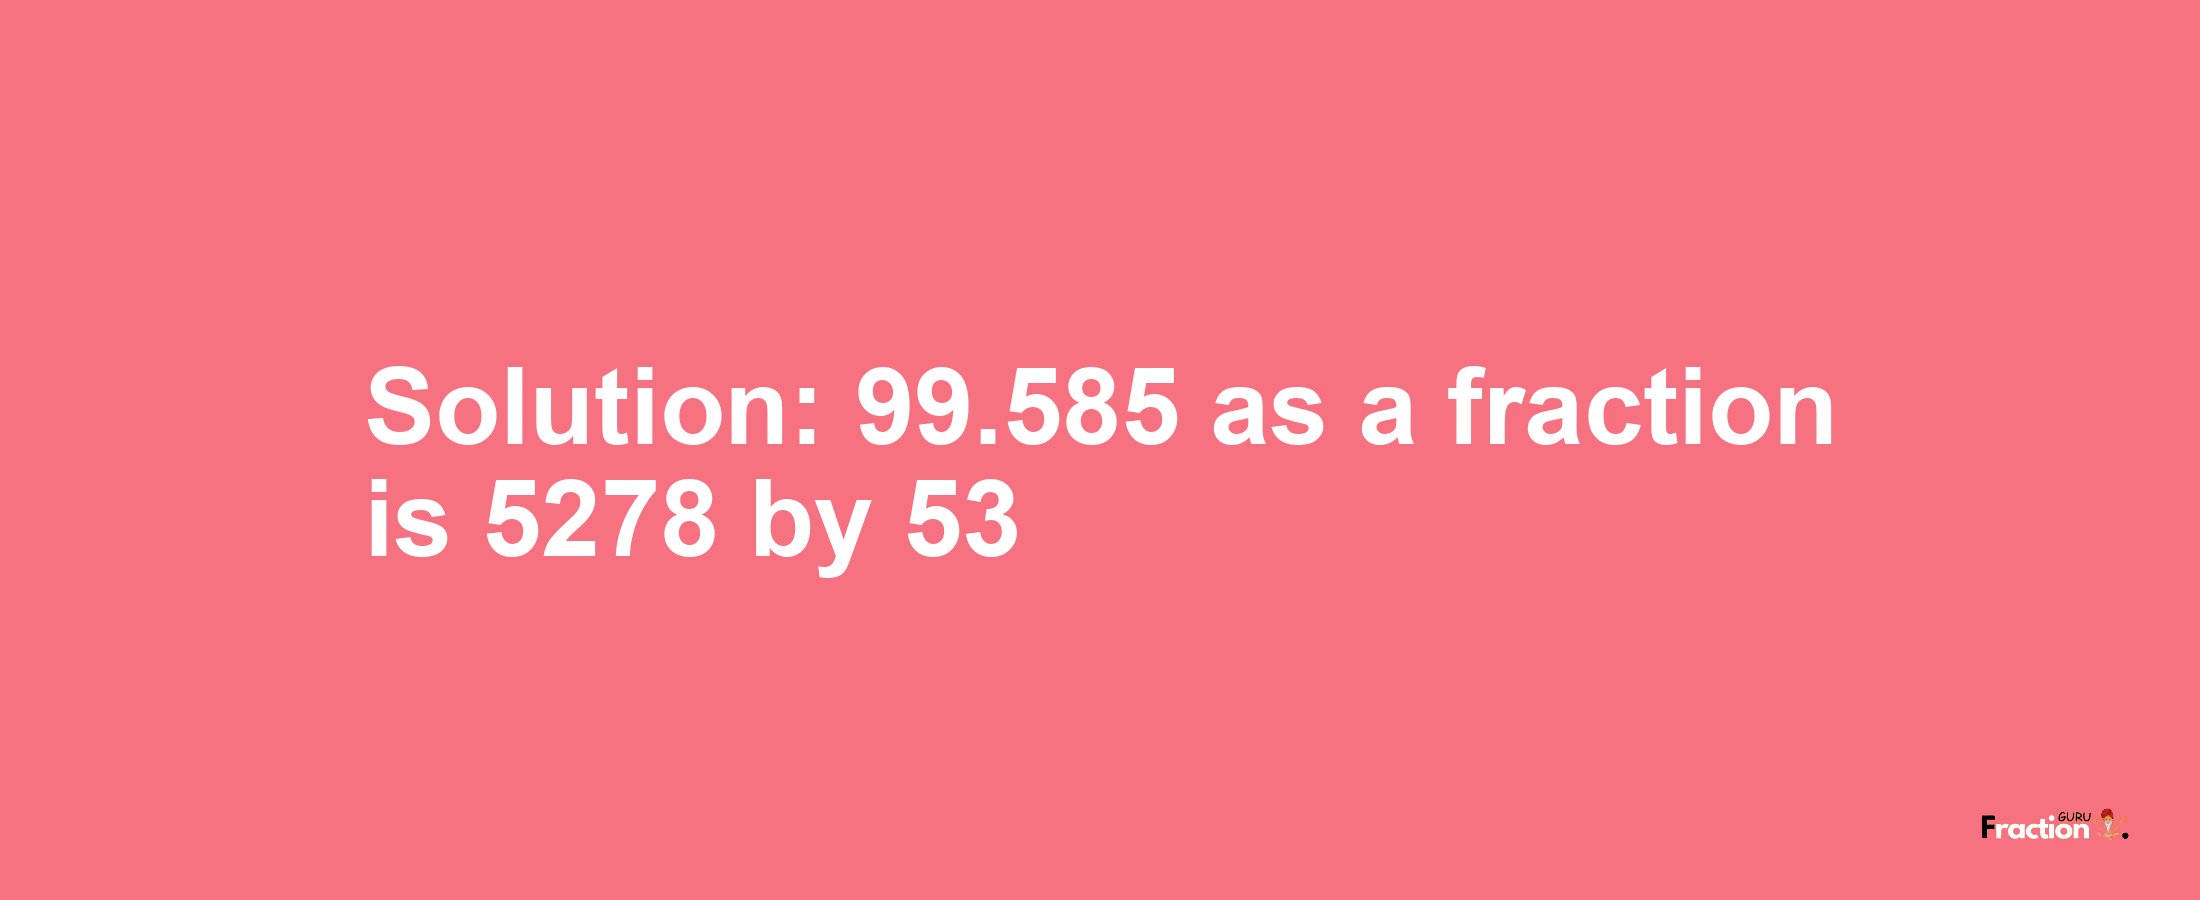 Solution:99.585 as a fraction is 5278/53